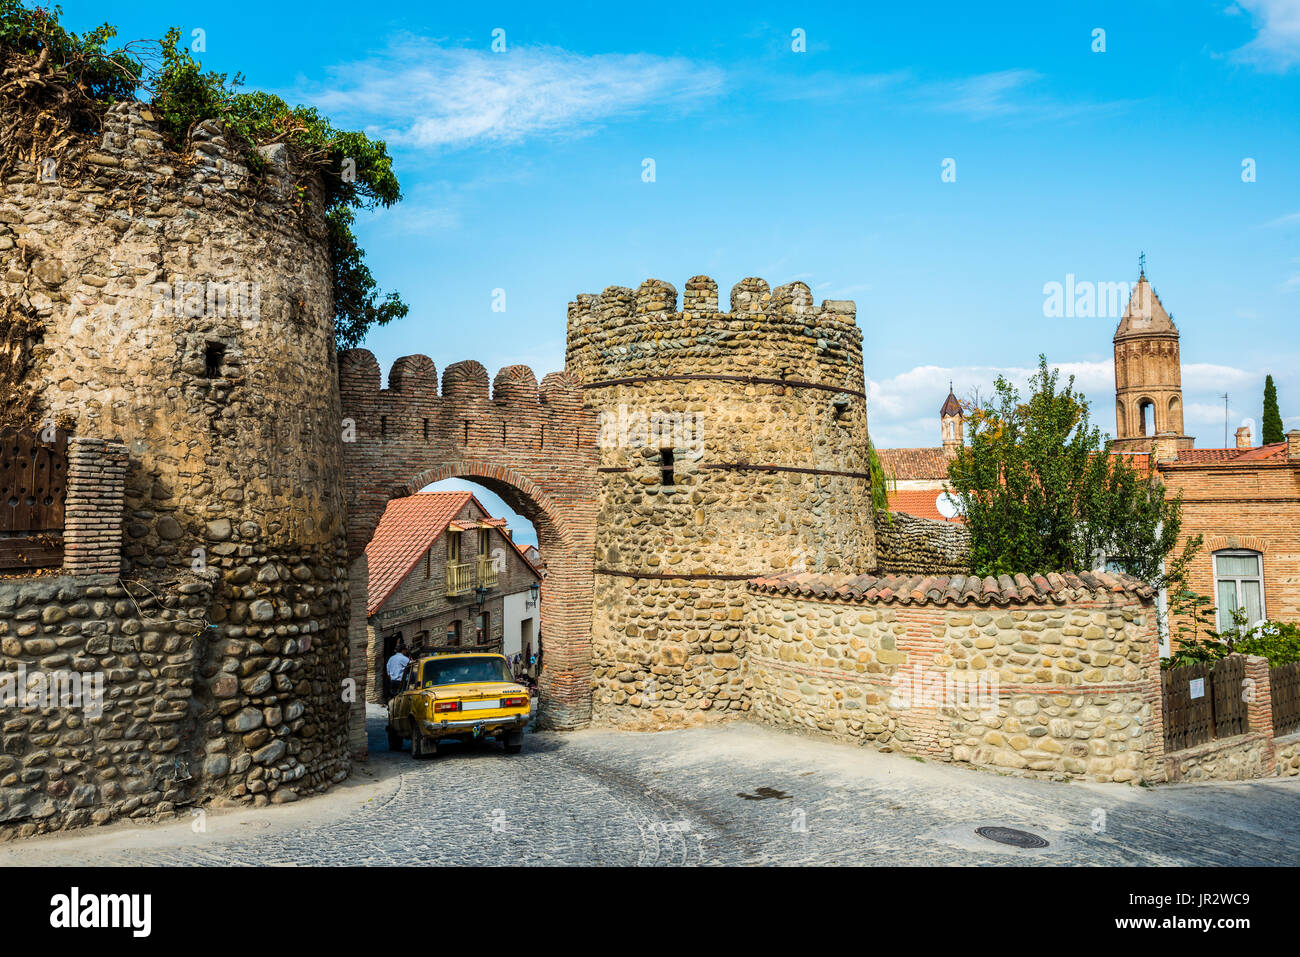 An Old Soviet Car Driving Through The Arch In The Remnants Of 18th Century Fortifications And Watchtowers; Sighnaghi, Kakheti Region, Georgia Stock Photo